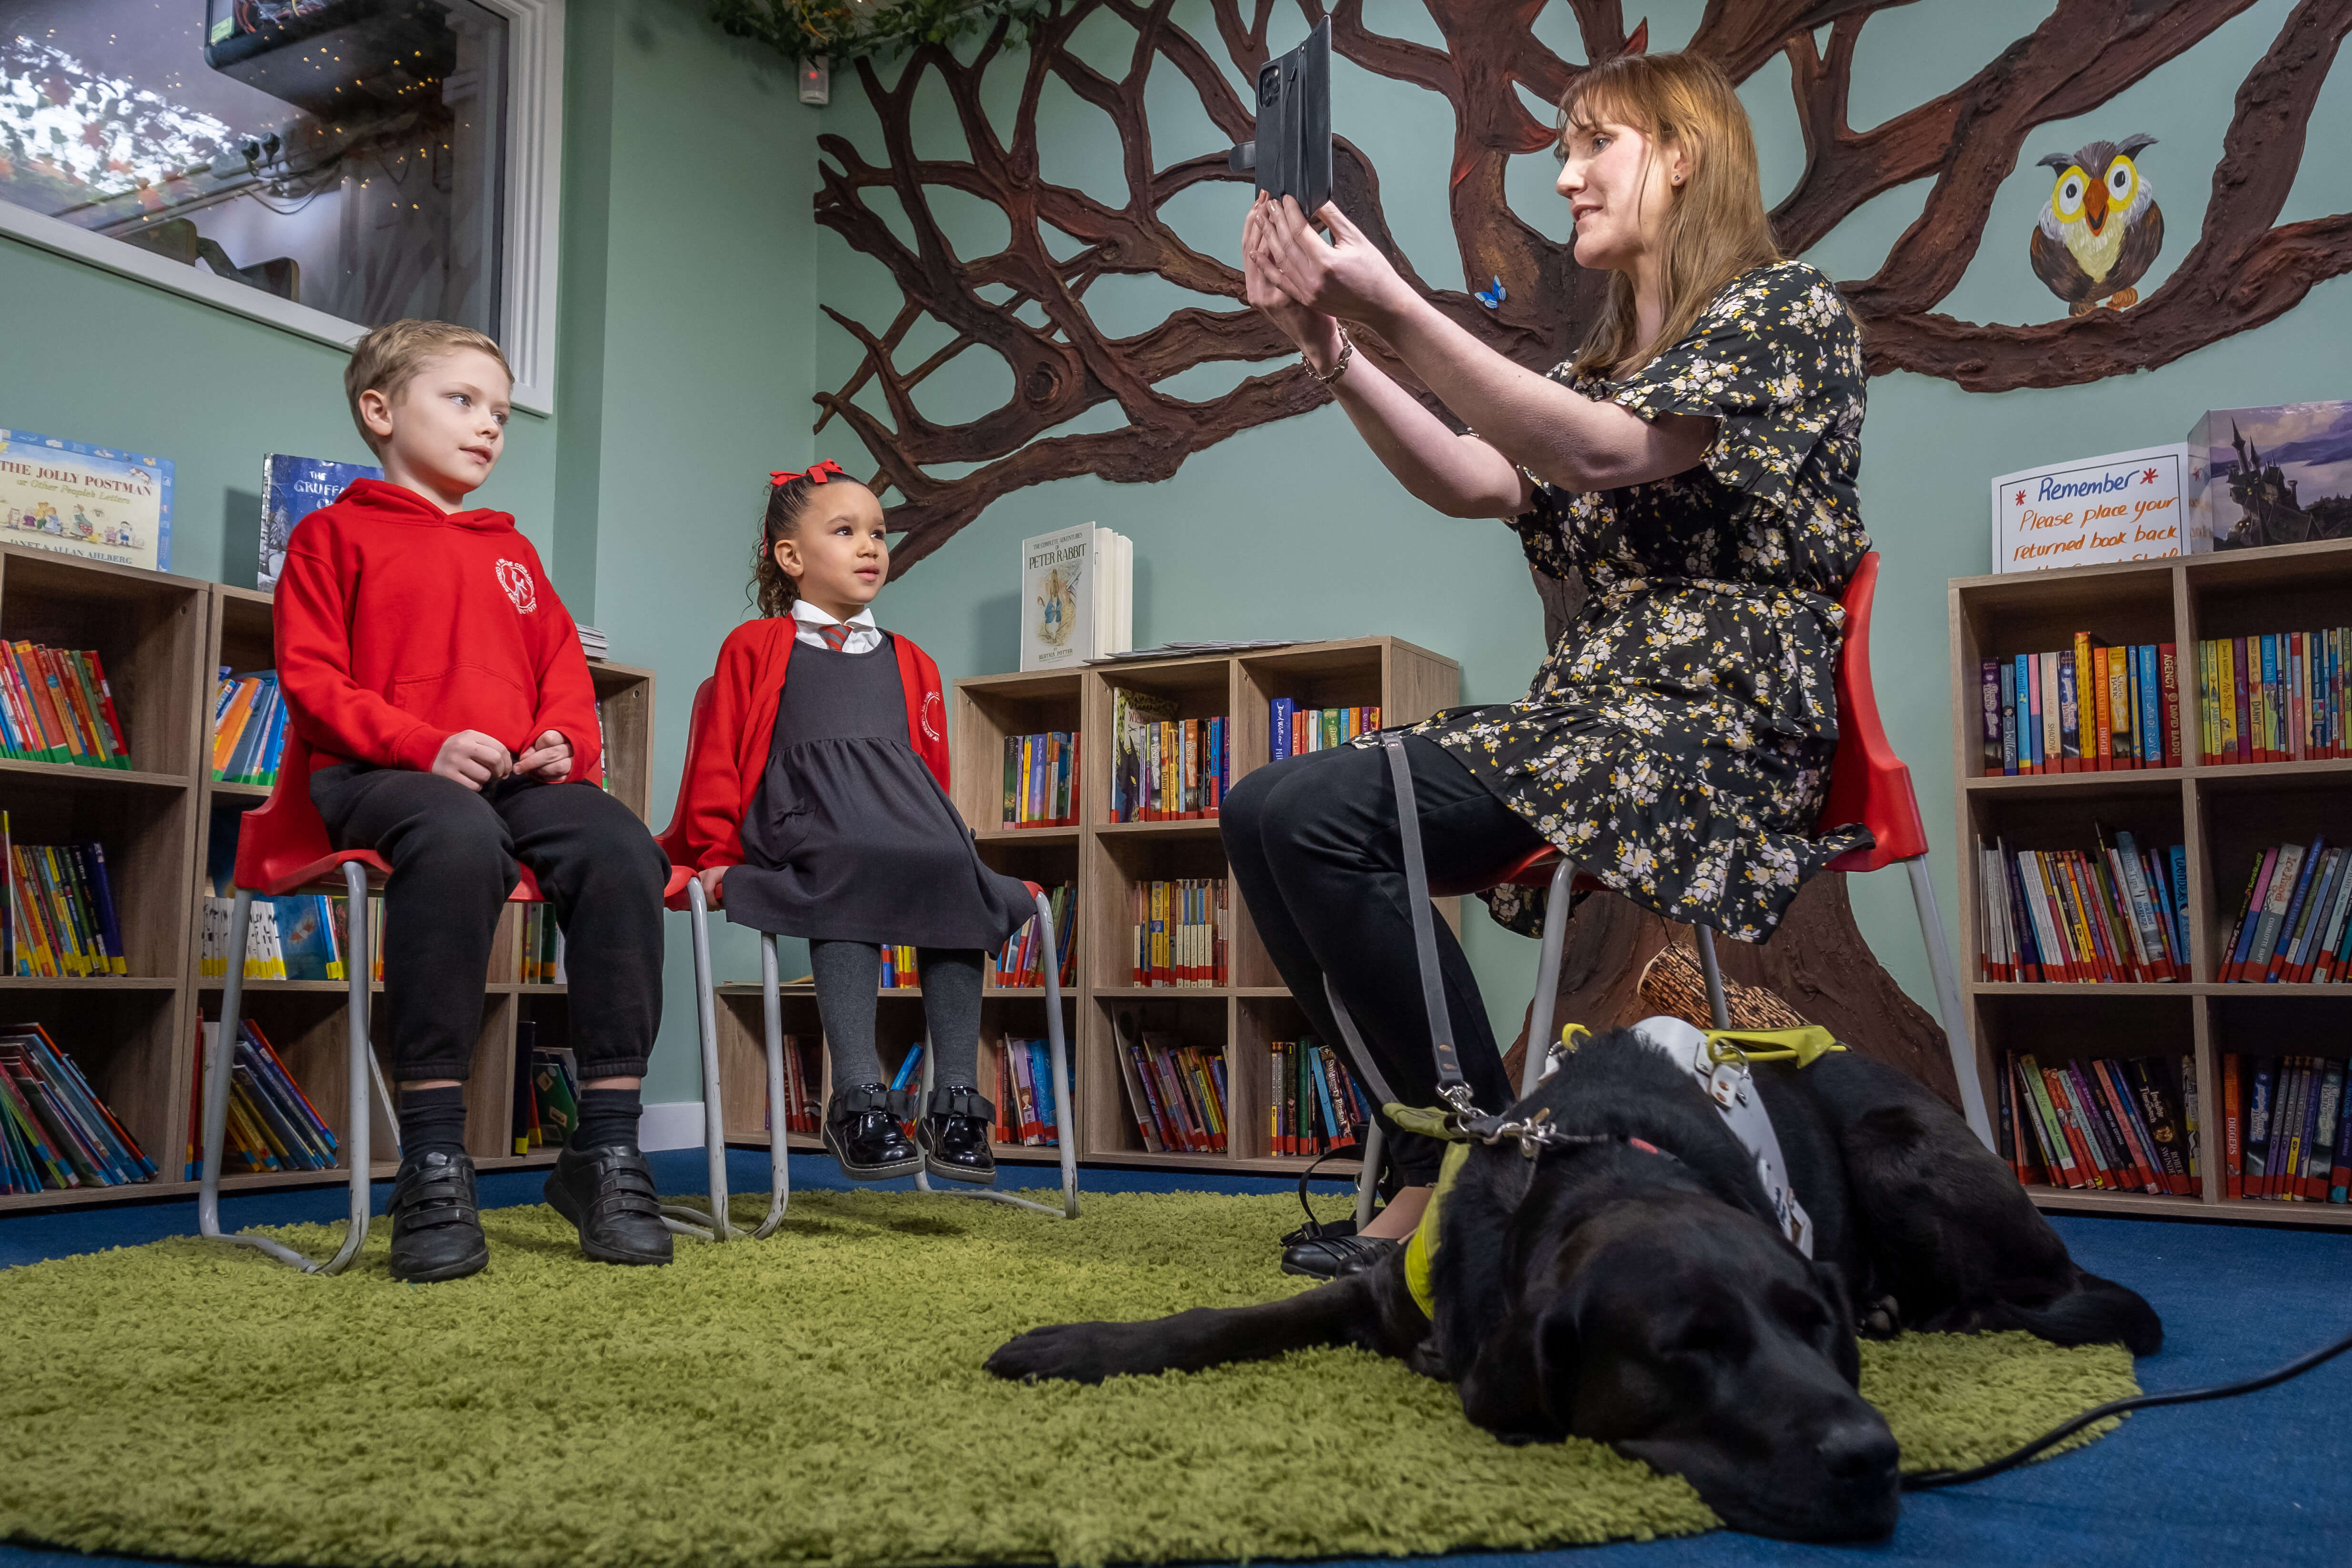 Siobhan Meade with her guide dog Marty visit with children at Kingston Primary School in Benfleet Essex.